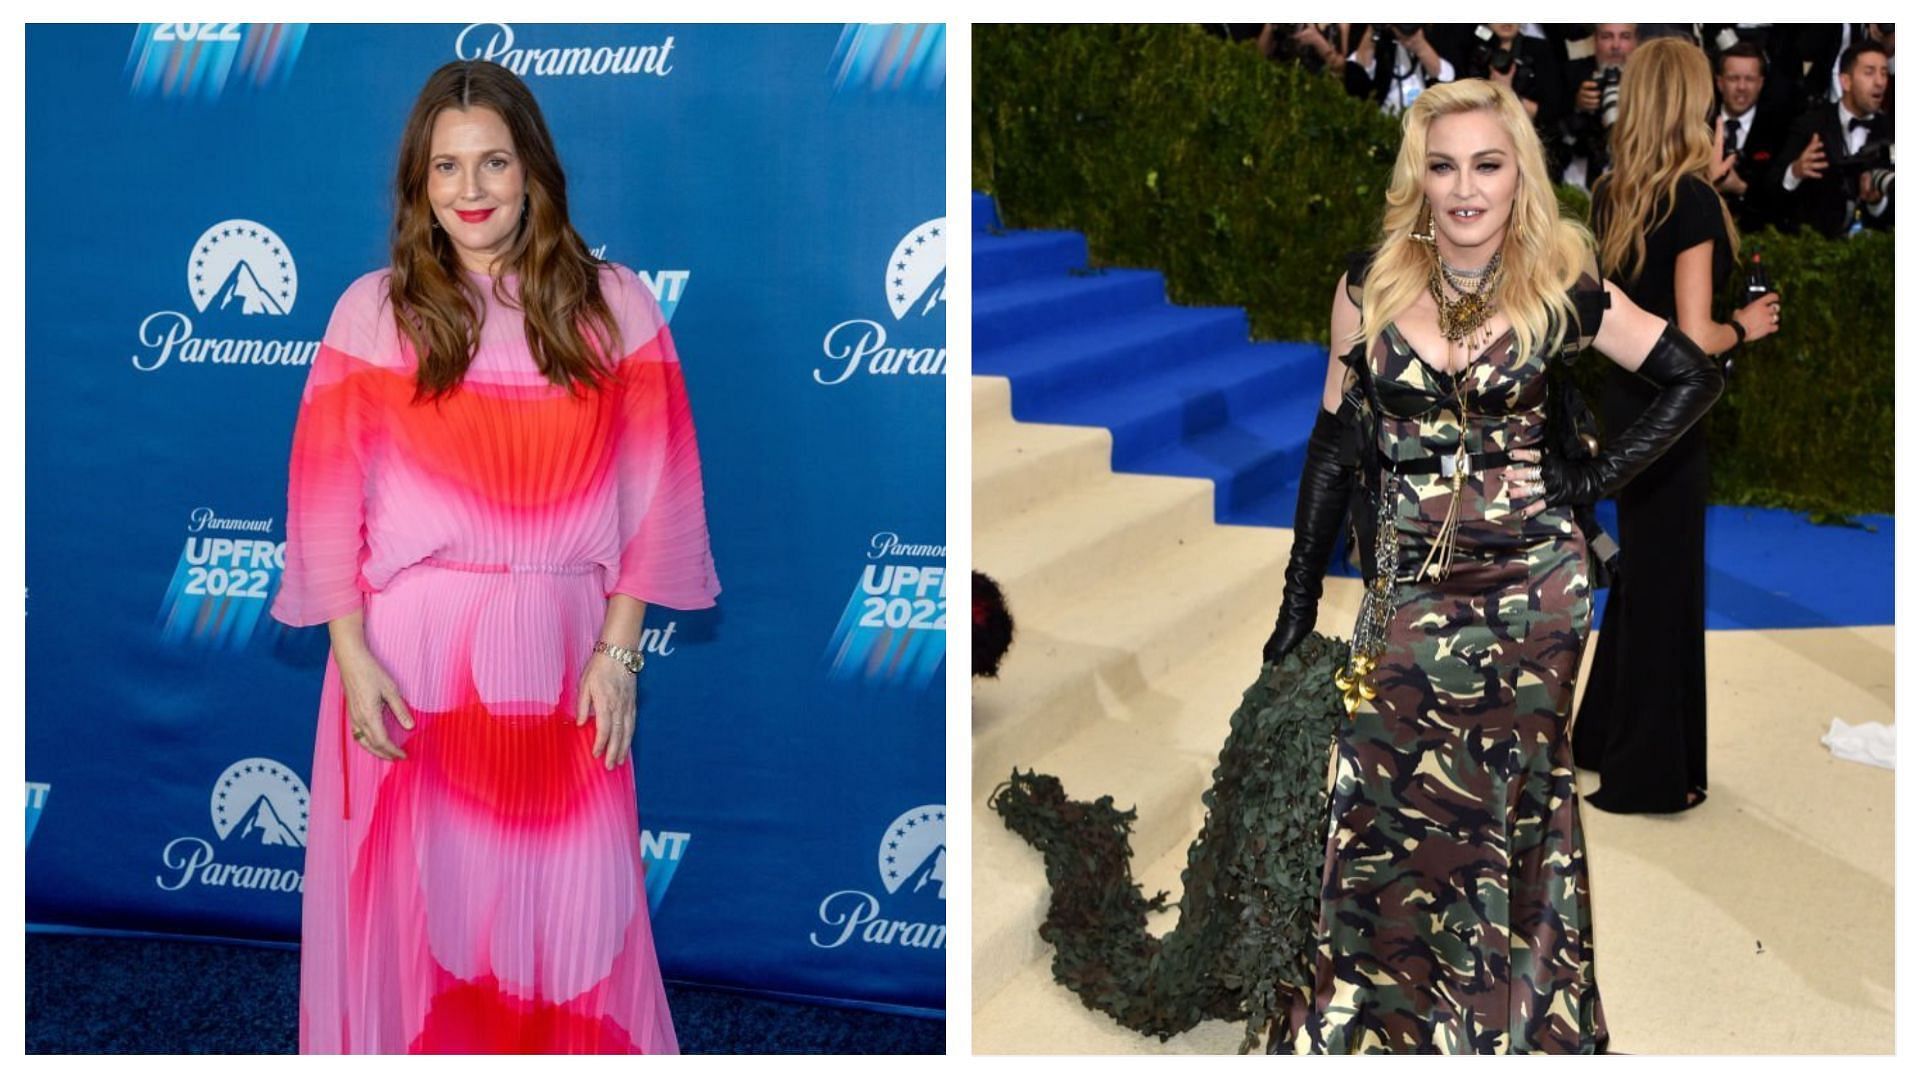 Drew Barrymore and Madonna were among the celebrity guests who attended the wedding (Images via Roy Rochlin and John Shearer/Getty Images)